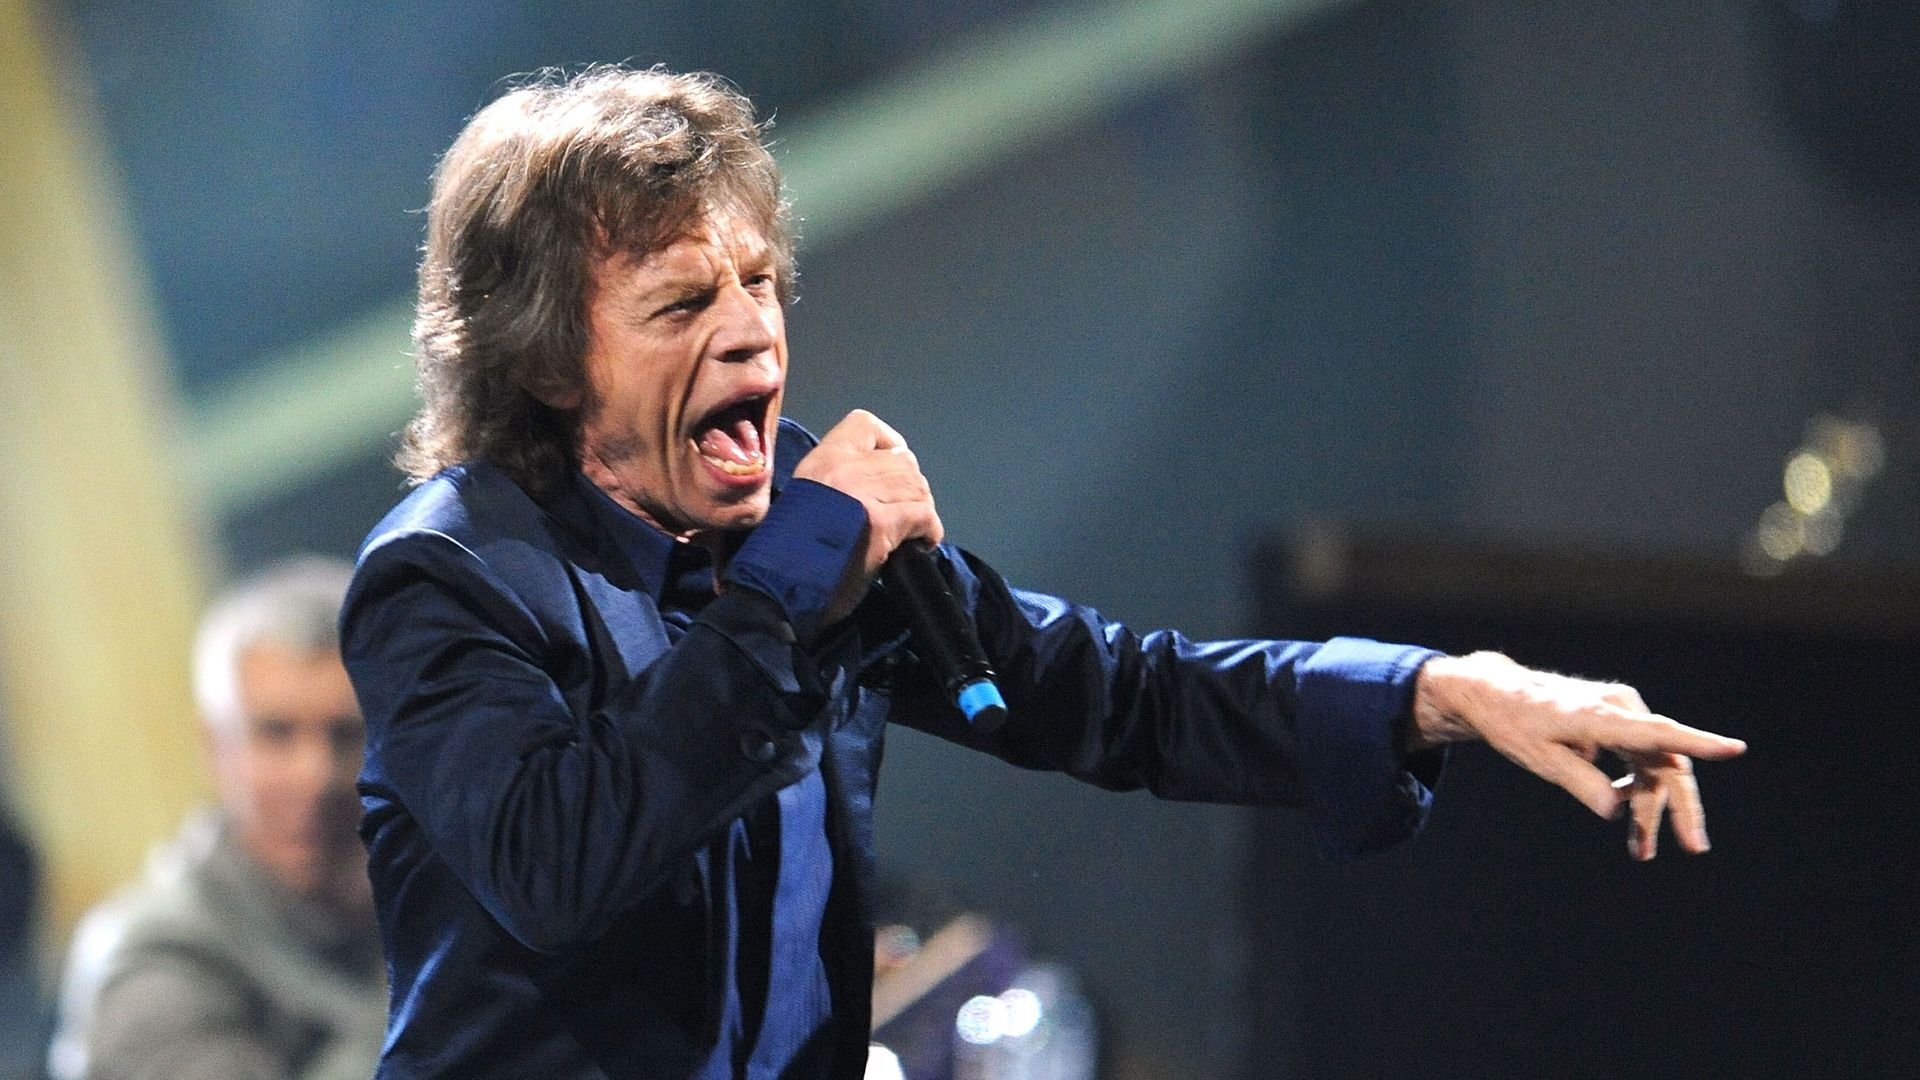 Mick Jagger au Rock and Roll Hall Of Fame en 2009